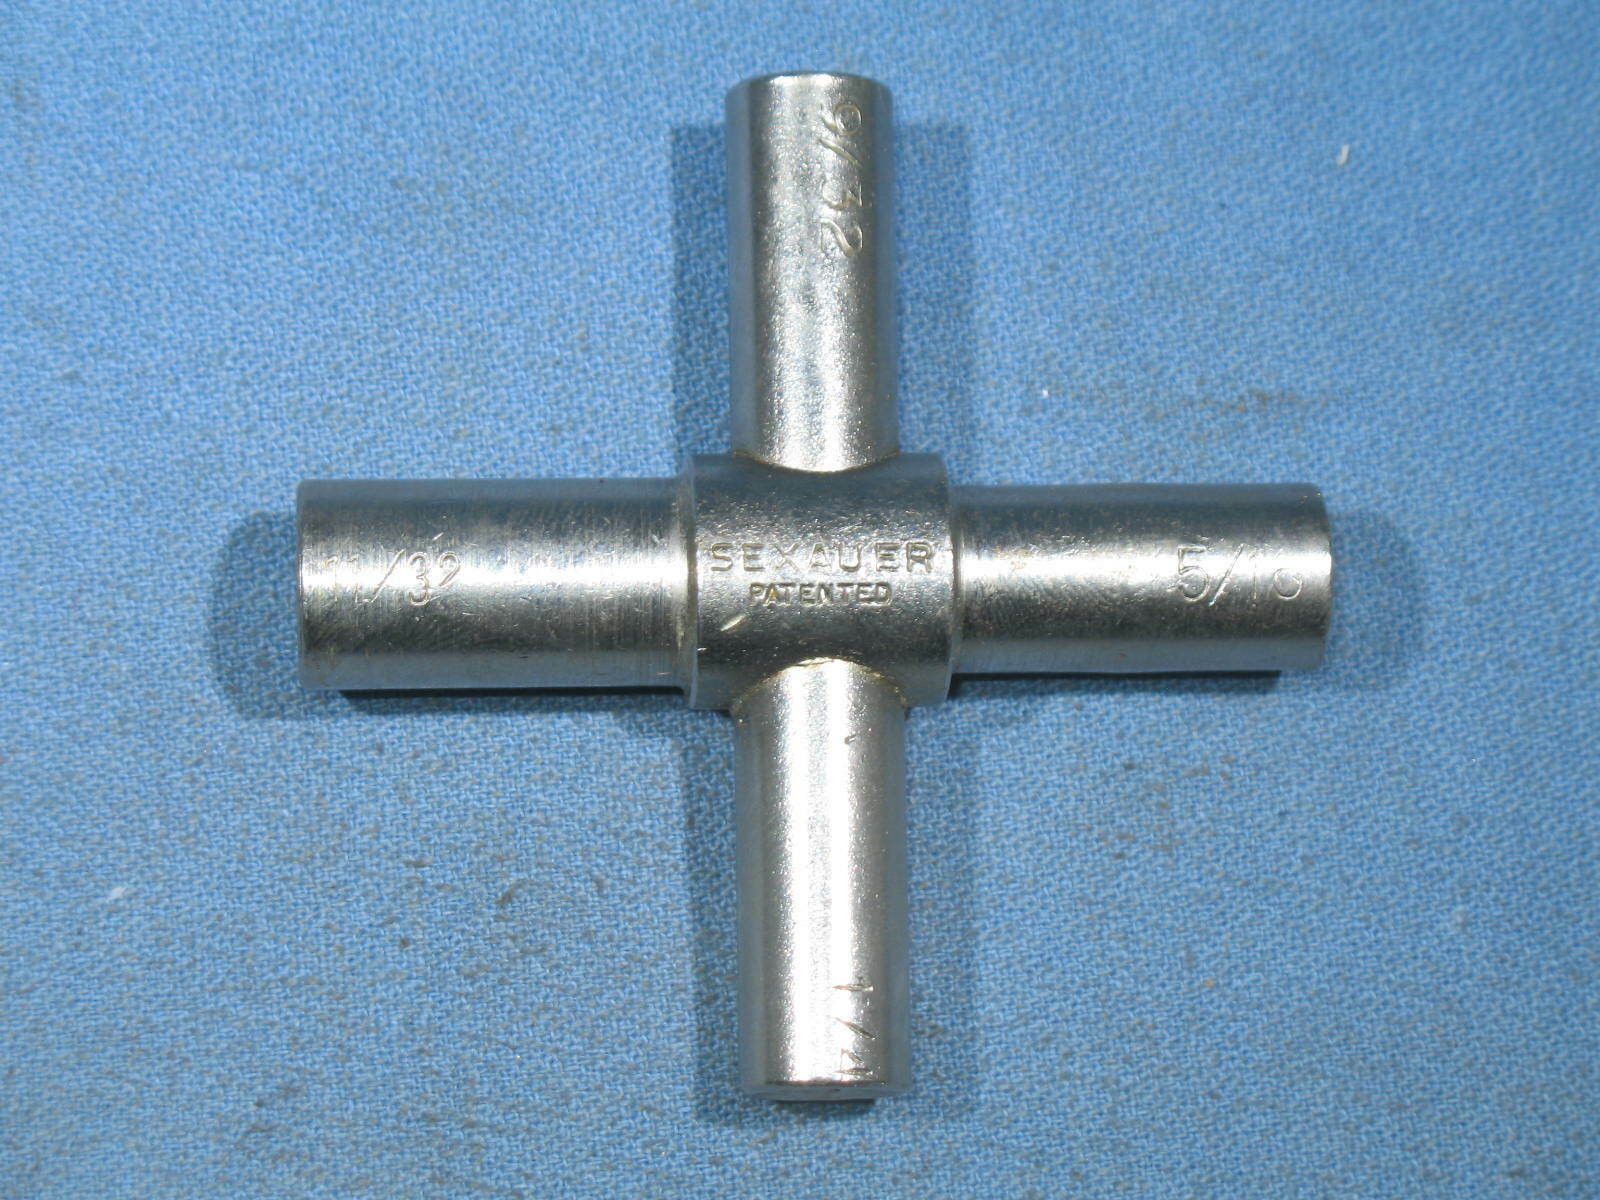 Sexauer Square 4-way Sillcock Plumber Key Faucet Wrench 1/4 9/32 5/8 11/32